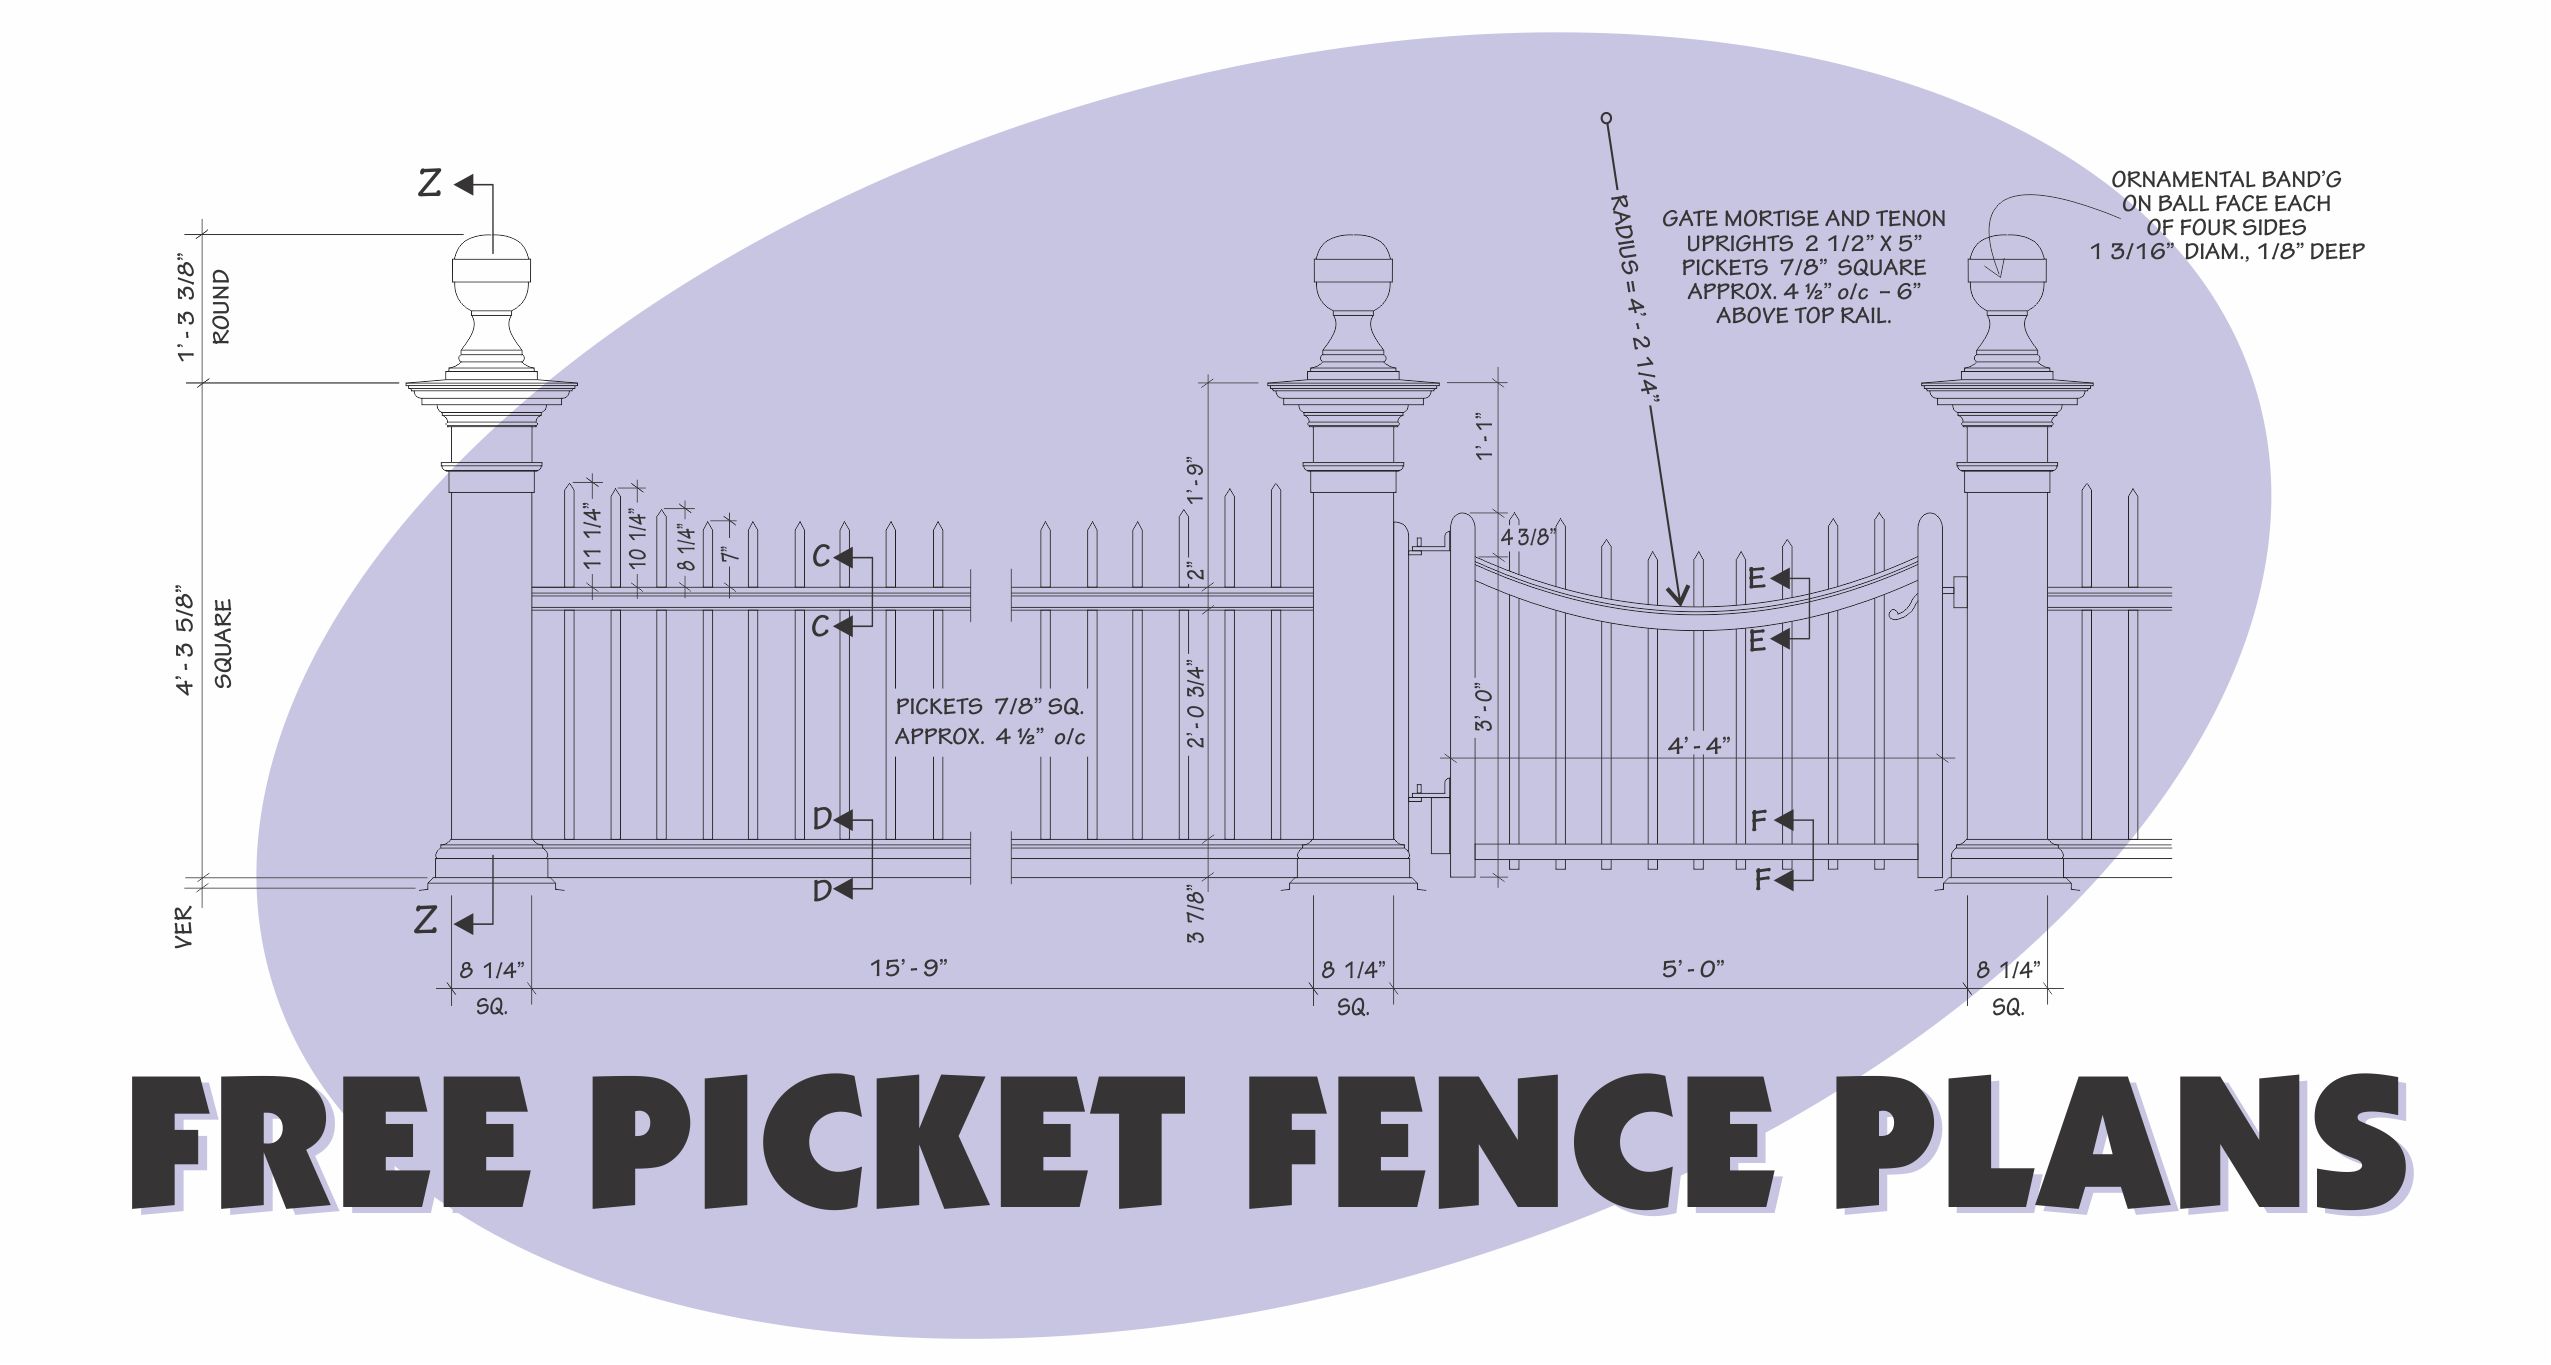 Free Picket Fence Plans 1